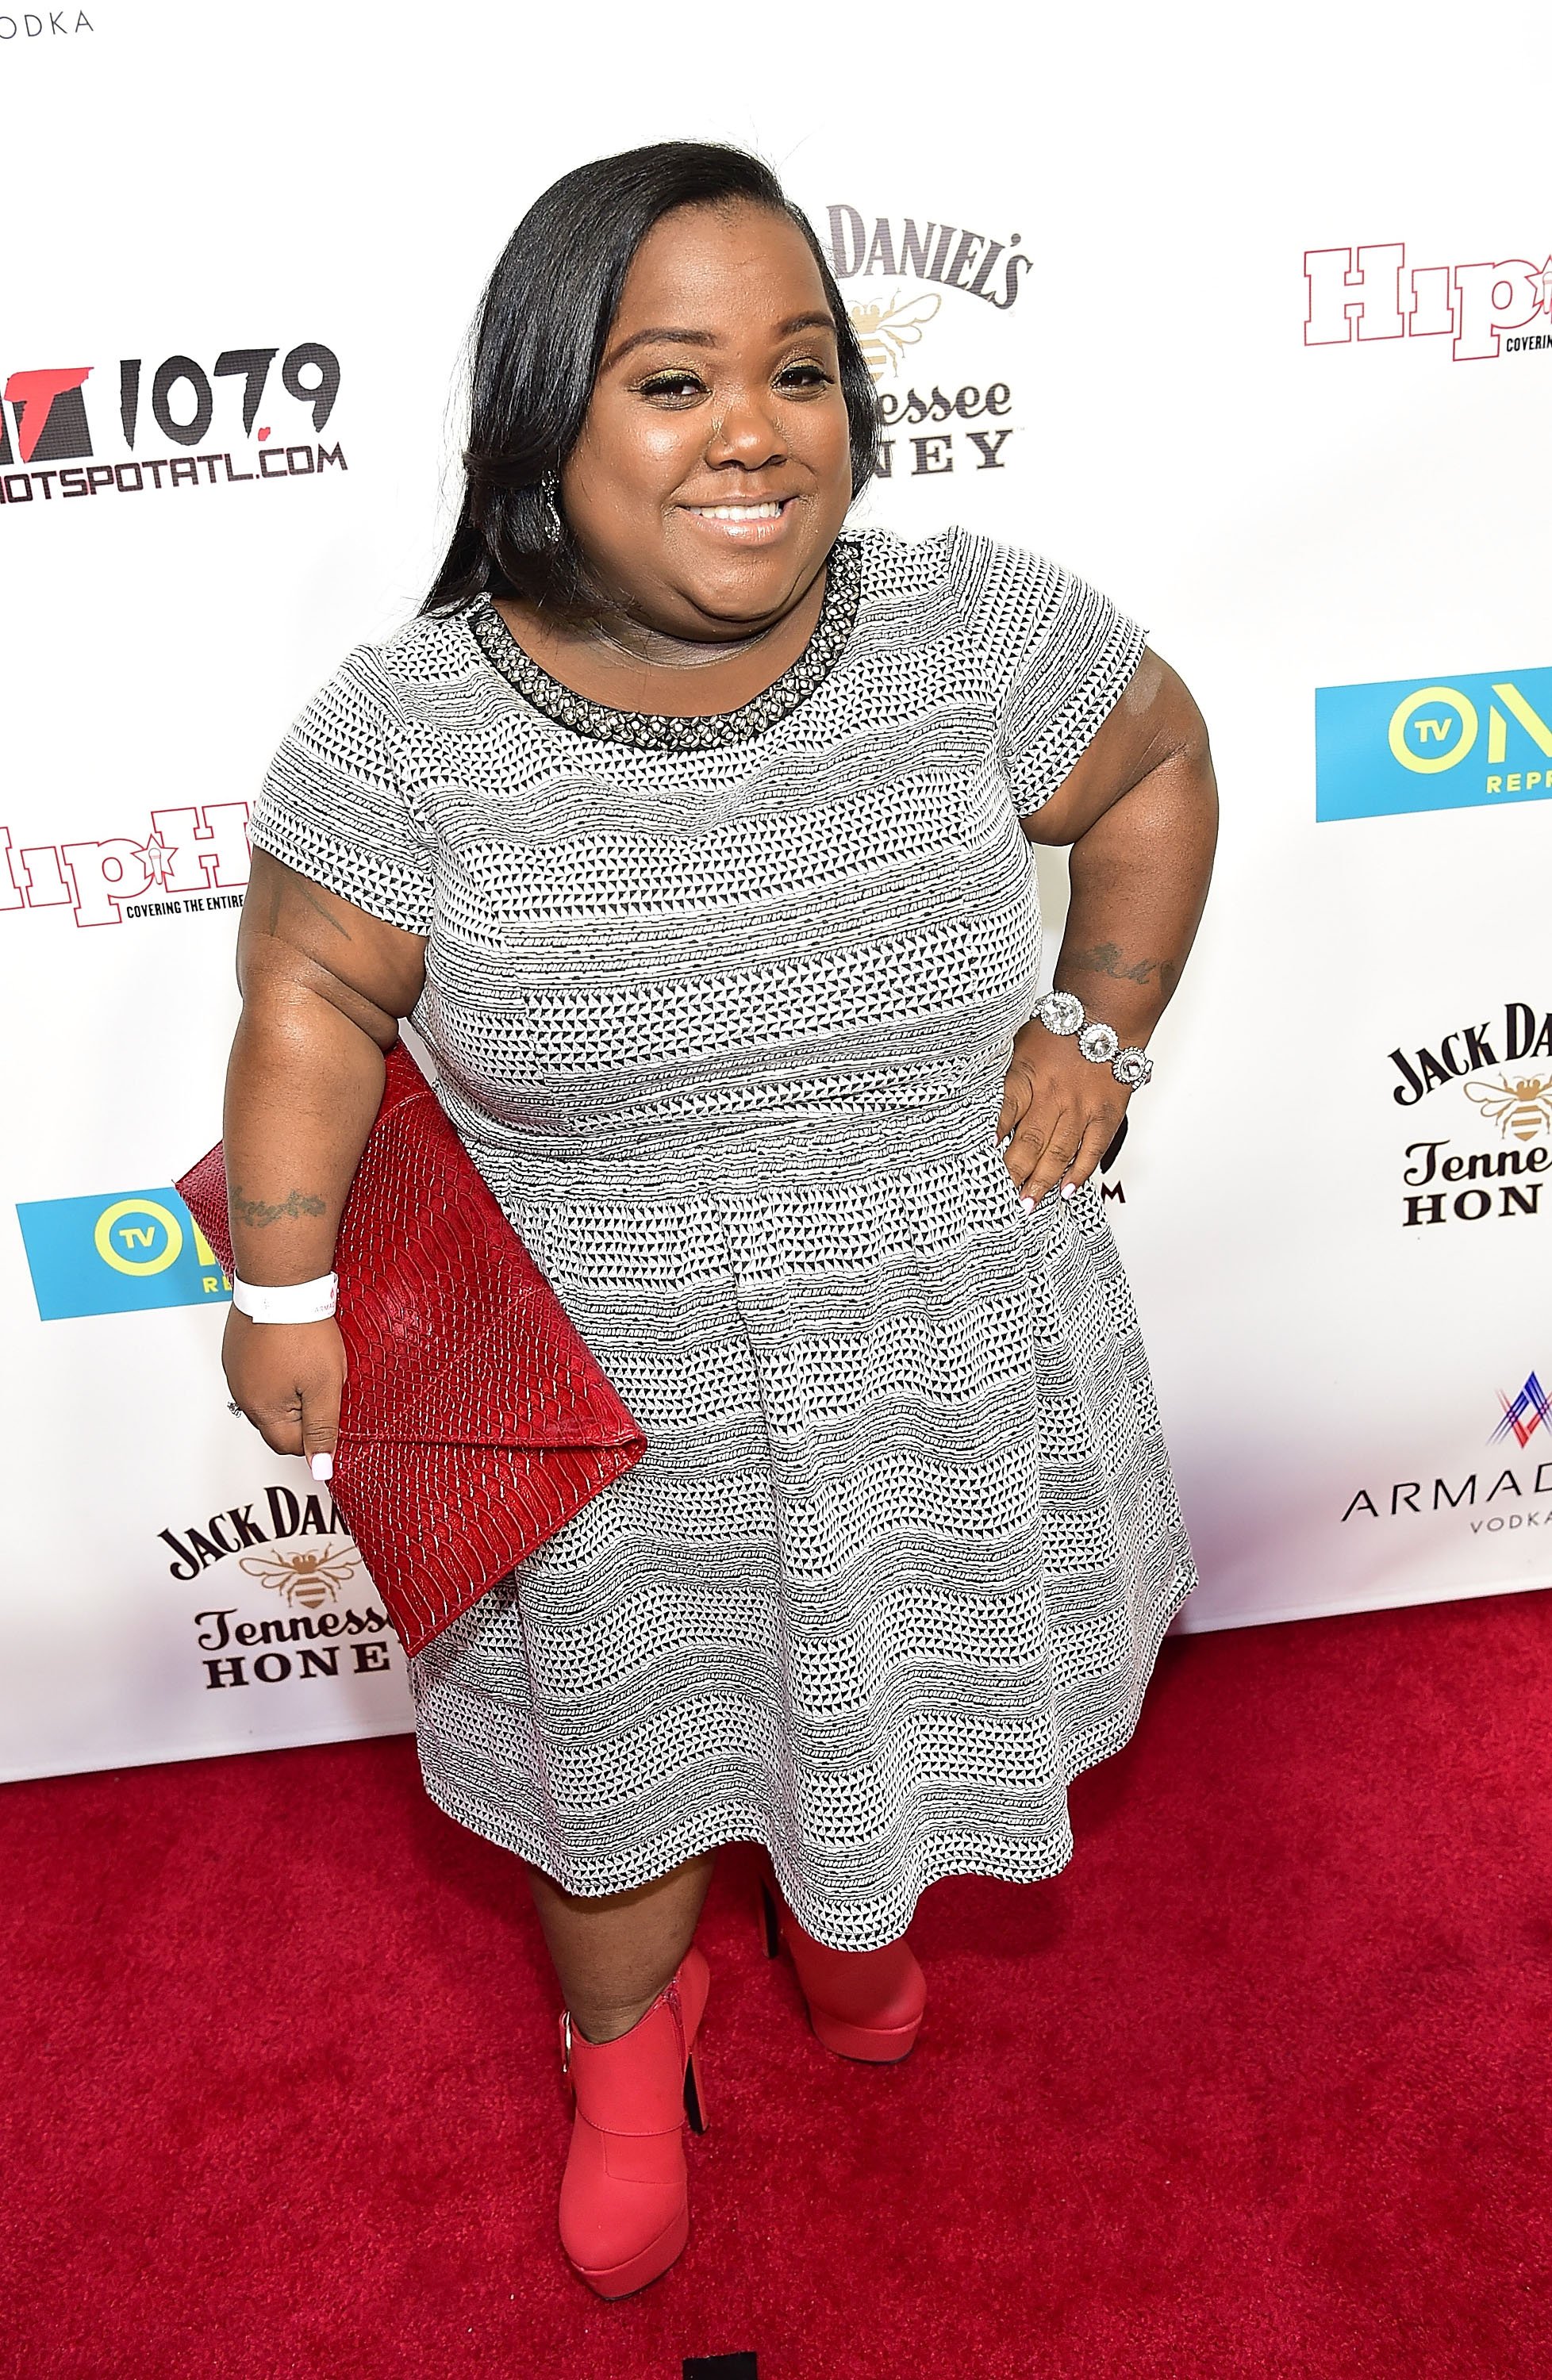 Ashley "Minnie" Ross attends "The Next 15" Atlanta screening on February 10, 2016. | Photo: Getty Images